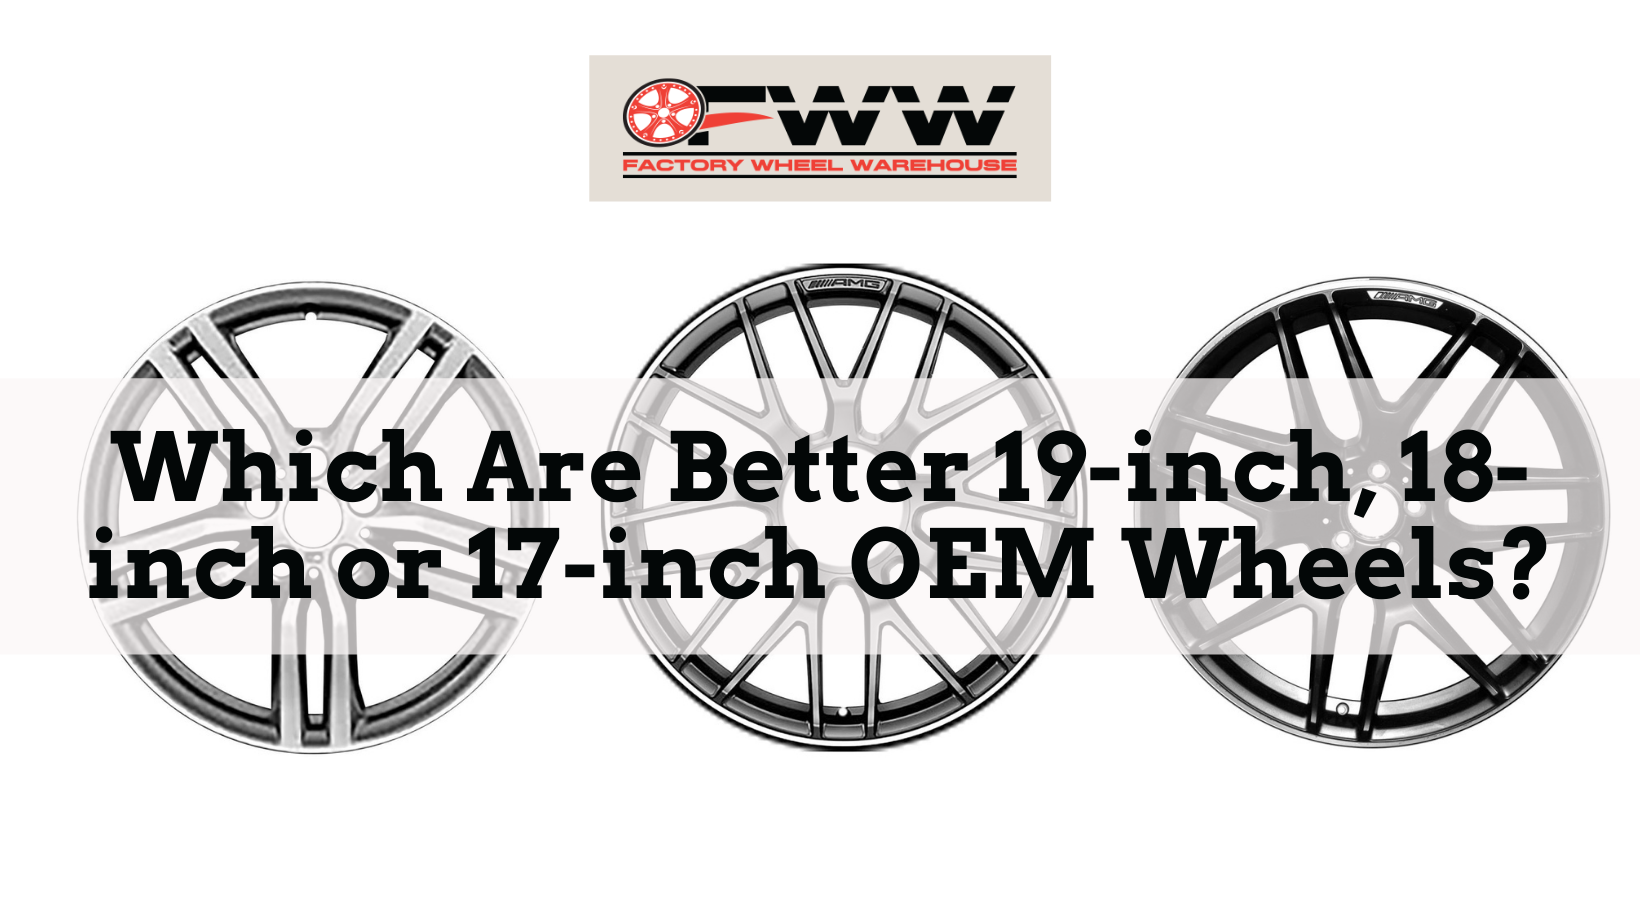 Which Are Better 19-inch, 18-inch, or 17-inch OEM Wheels?